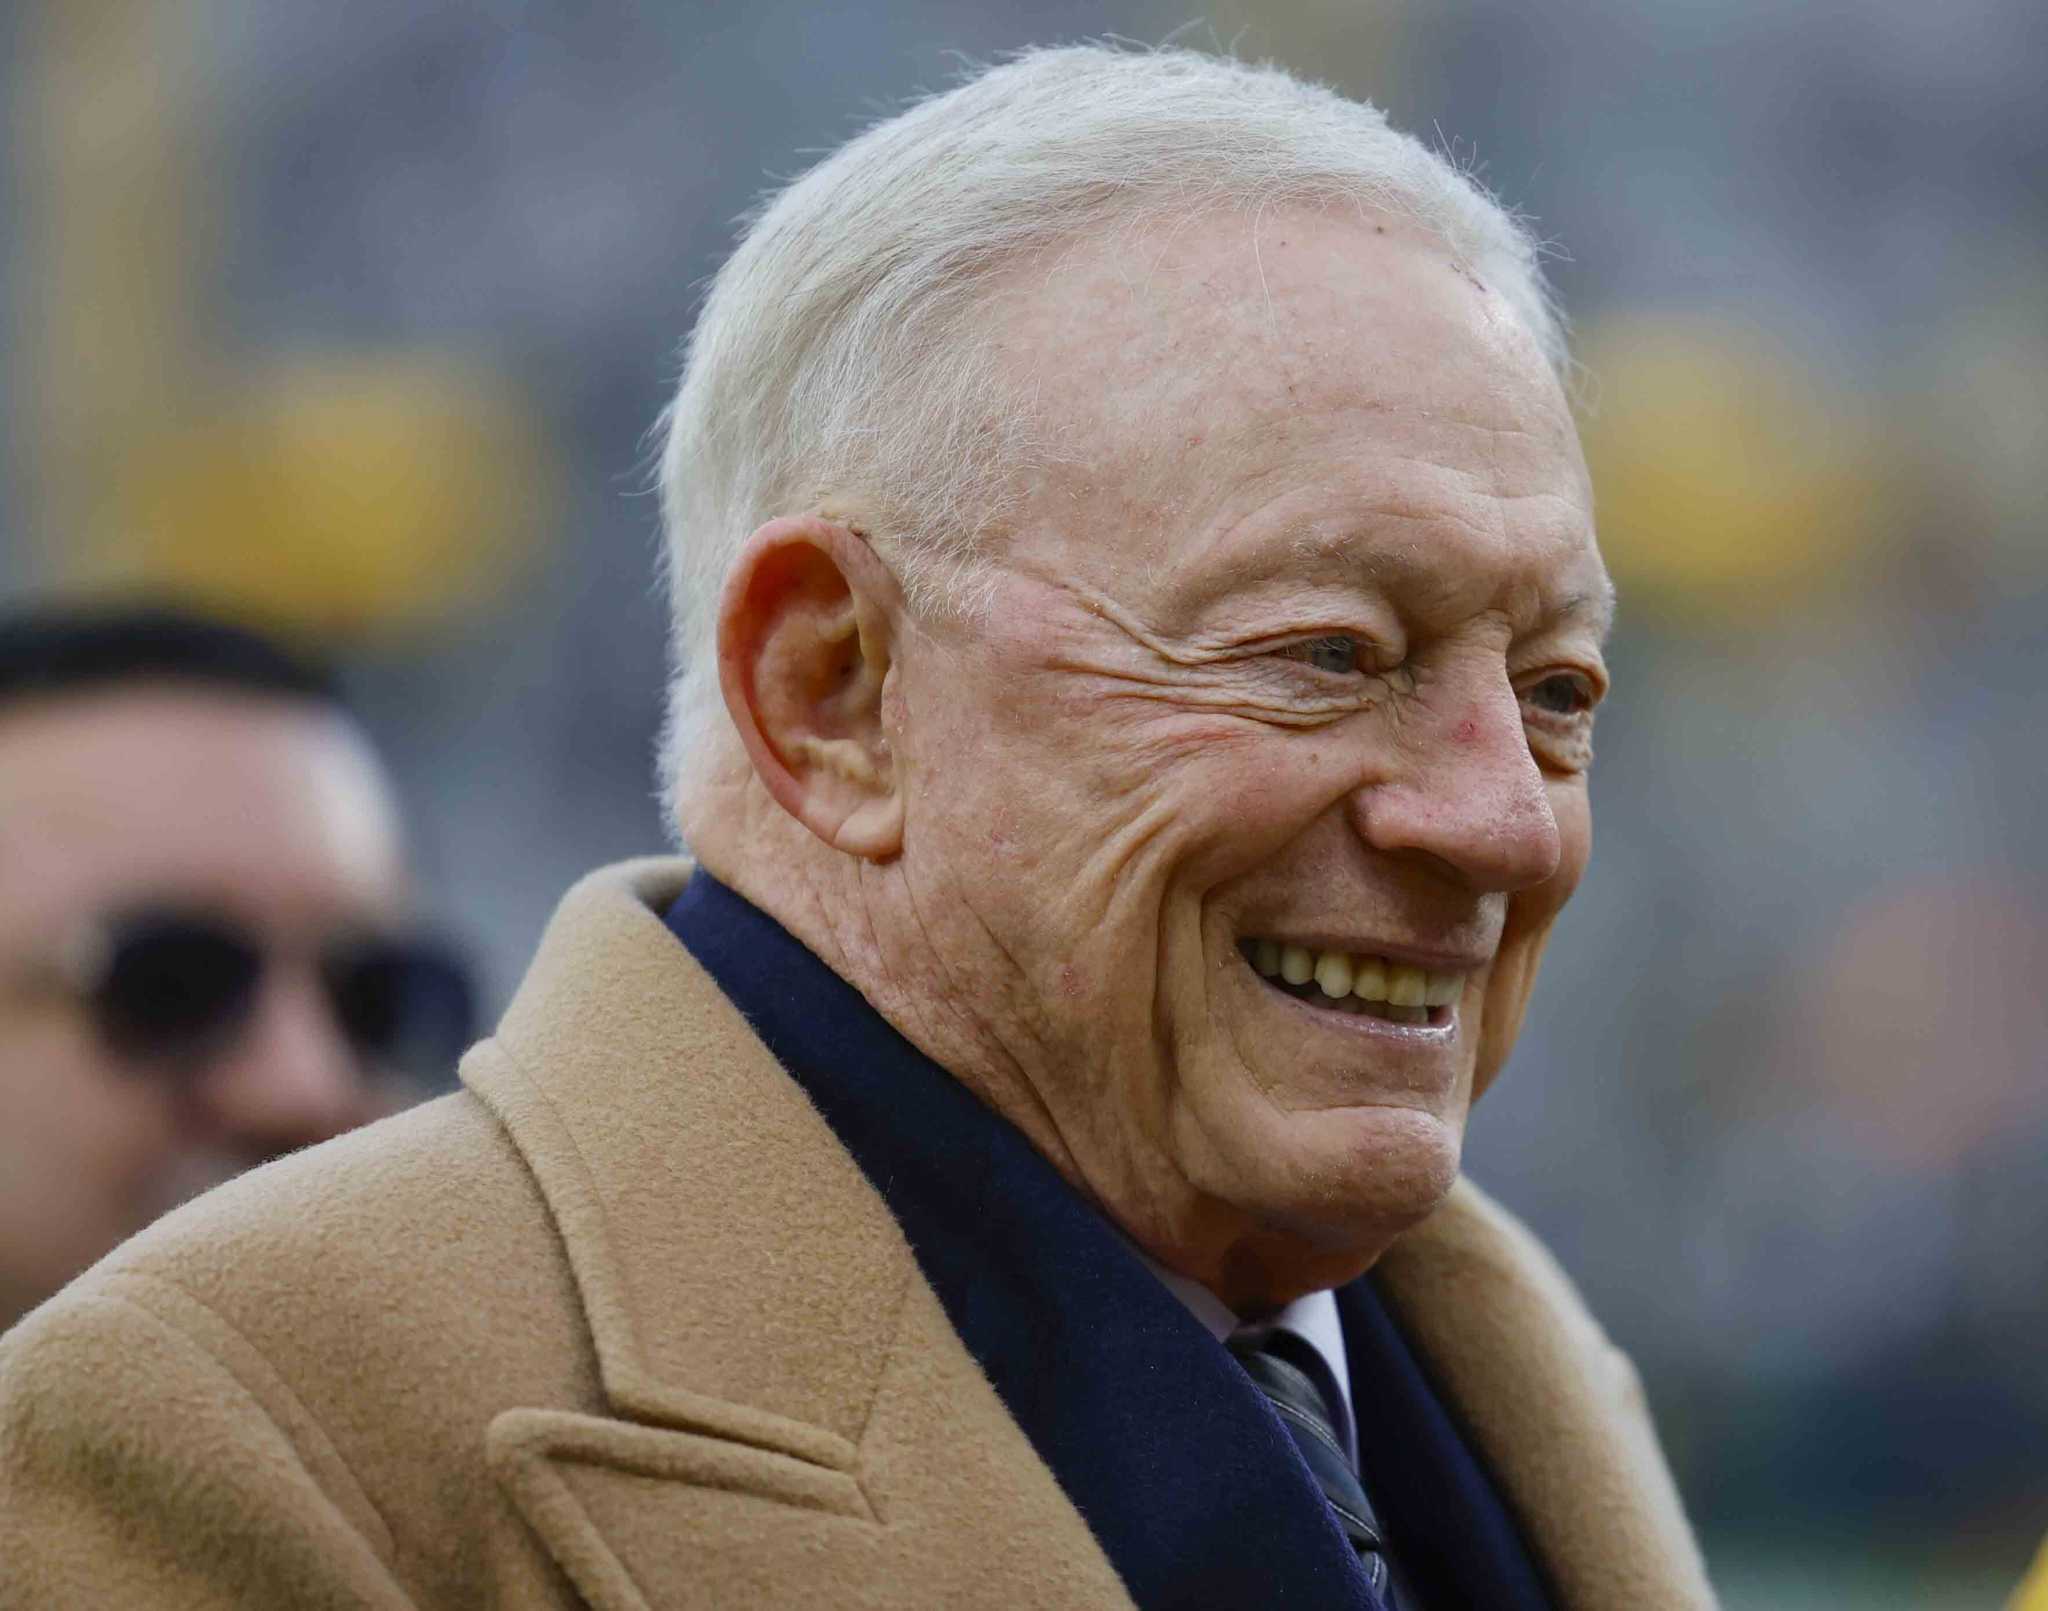 How Long Has Jerry Jones Owned the Dallas Cowboys?